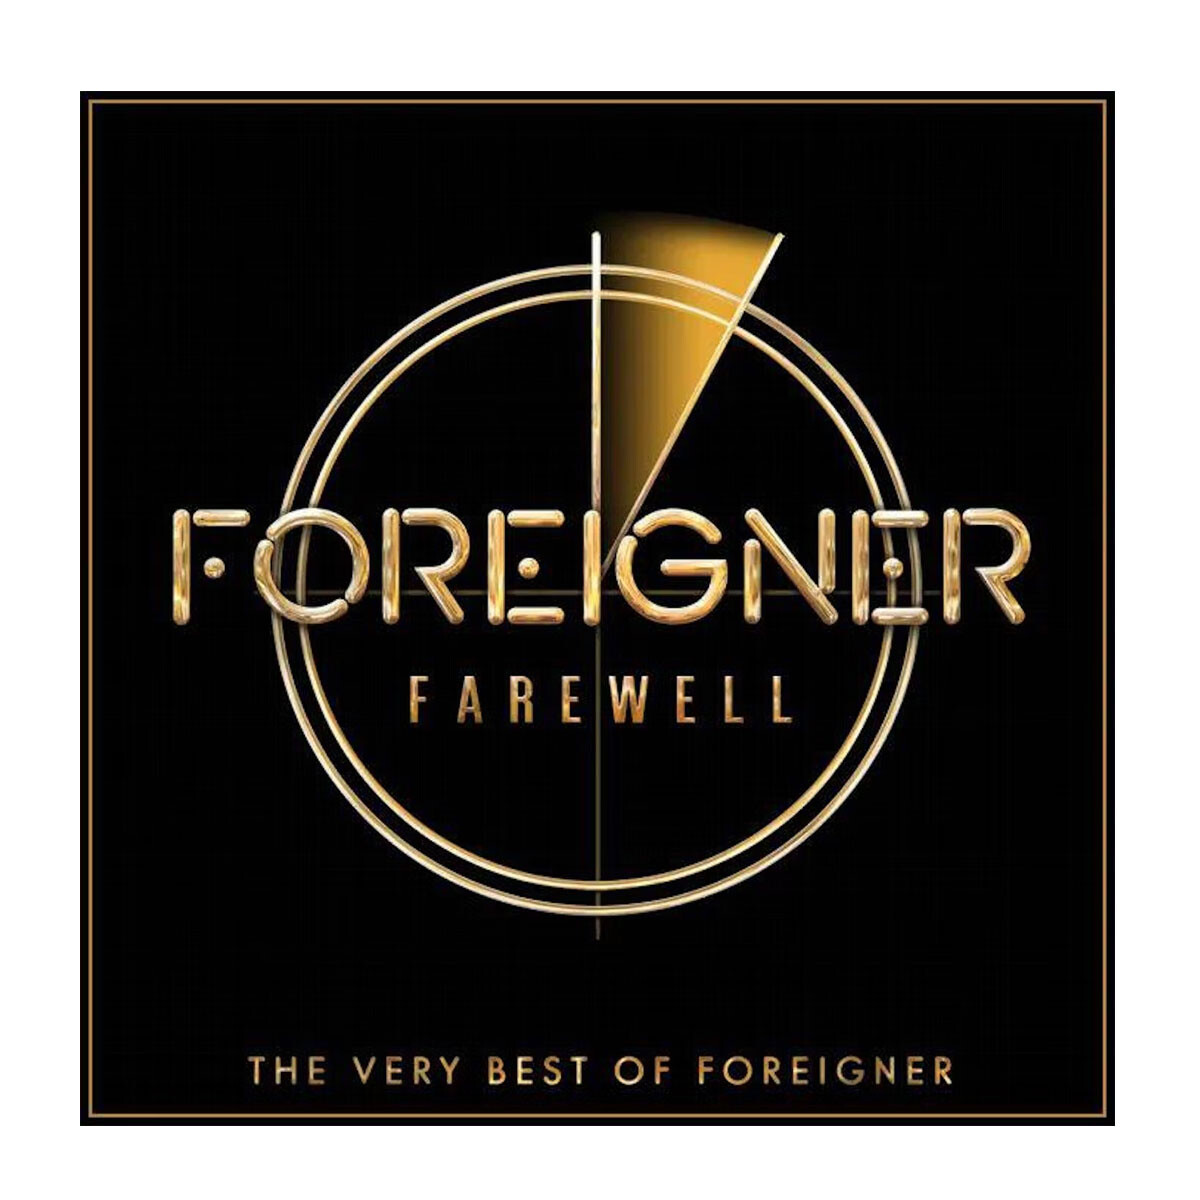 Foreigner - Farewell - The Very Best Of Foreigner - Gold - Vinilo 